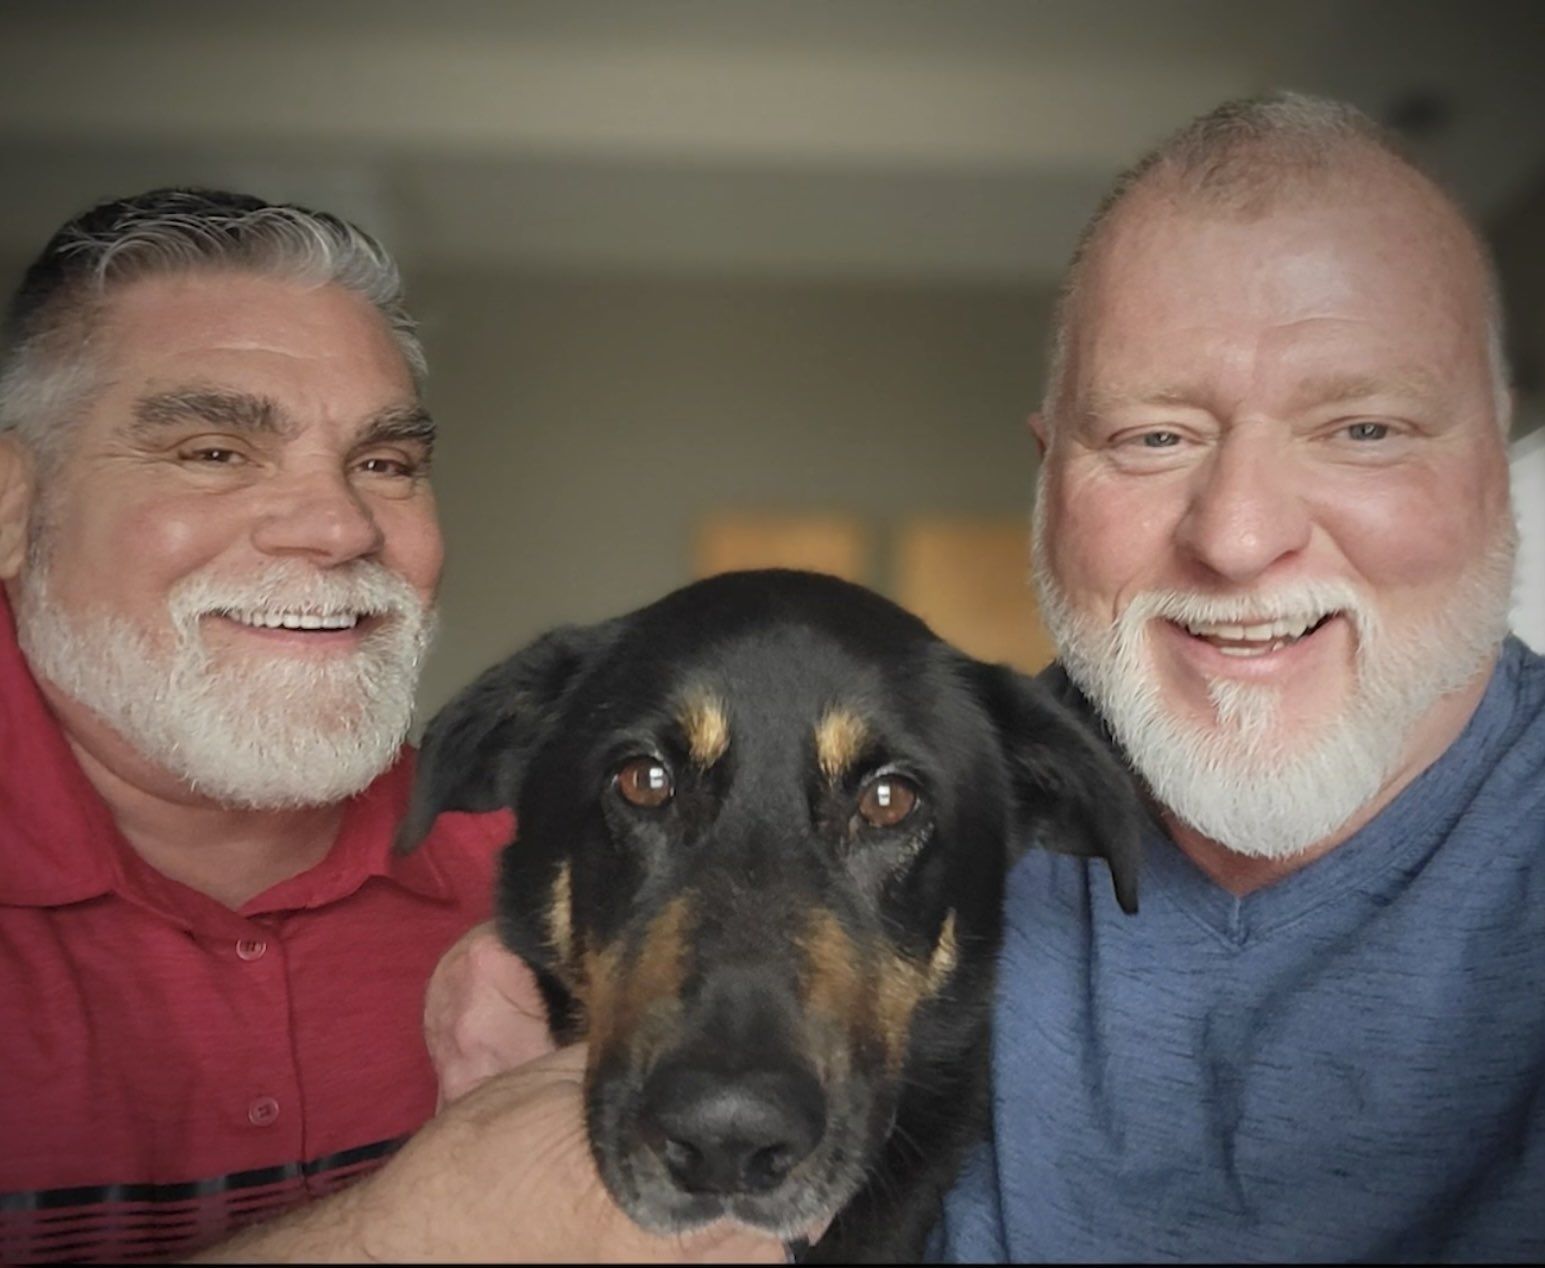 Dog Abandoned For Being 'Gay' Adopted by Same-Sex Couple, Renamed 'Oscar'